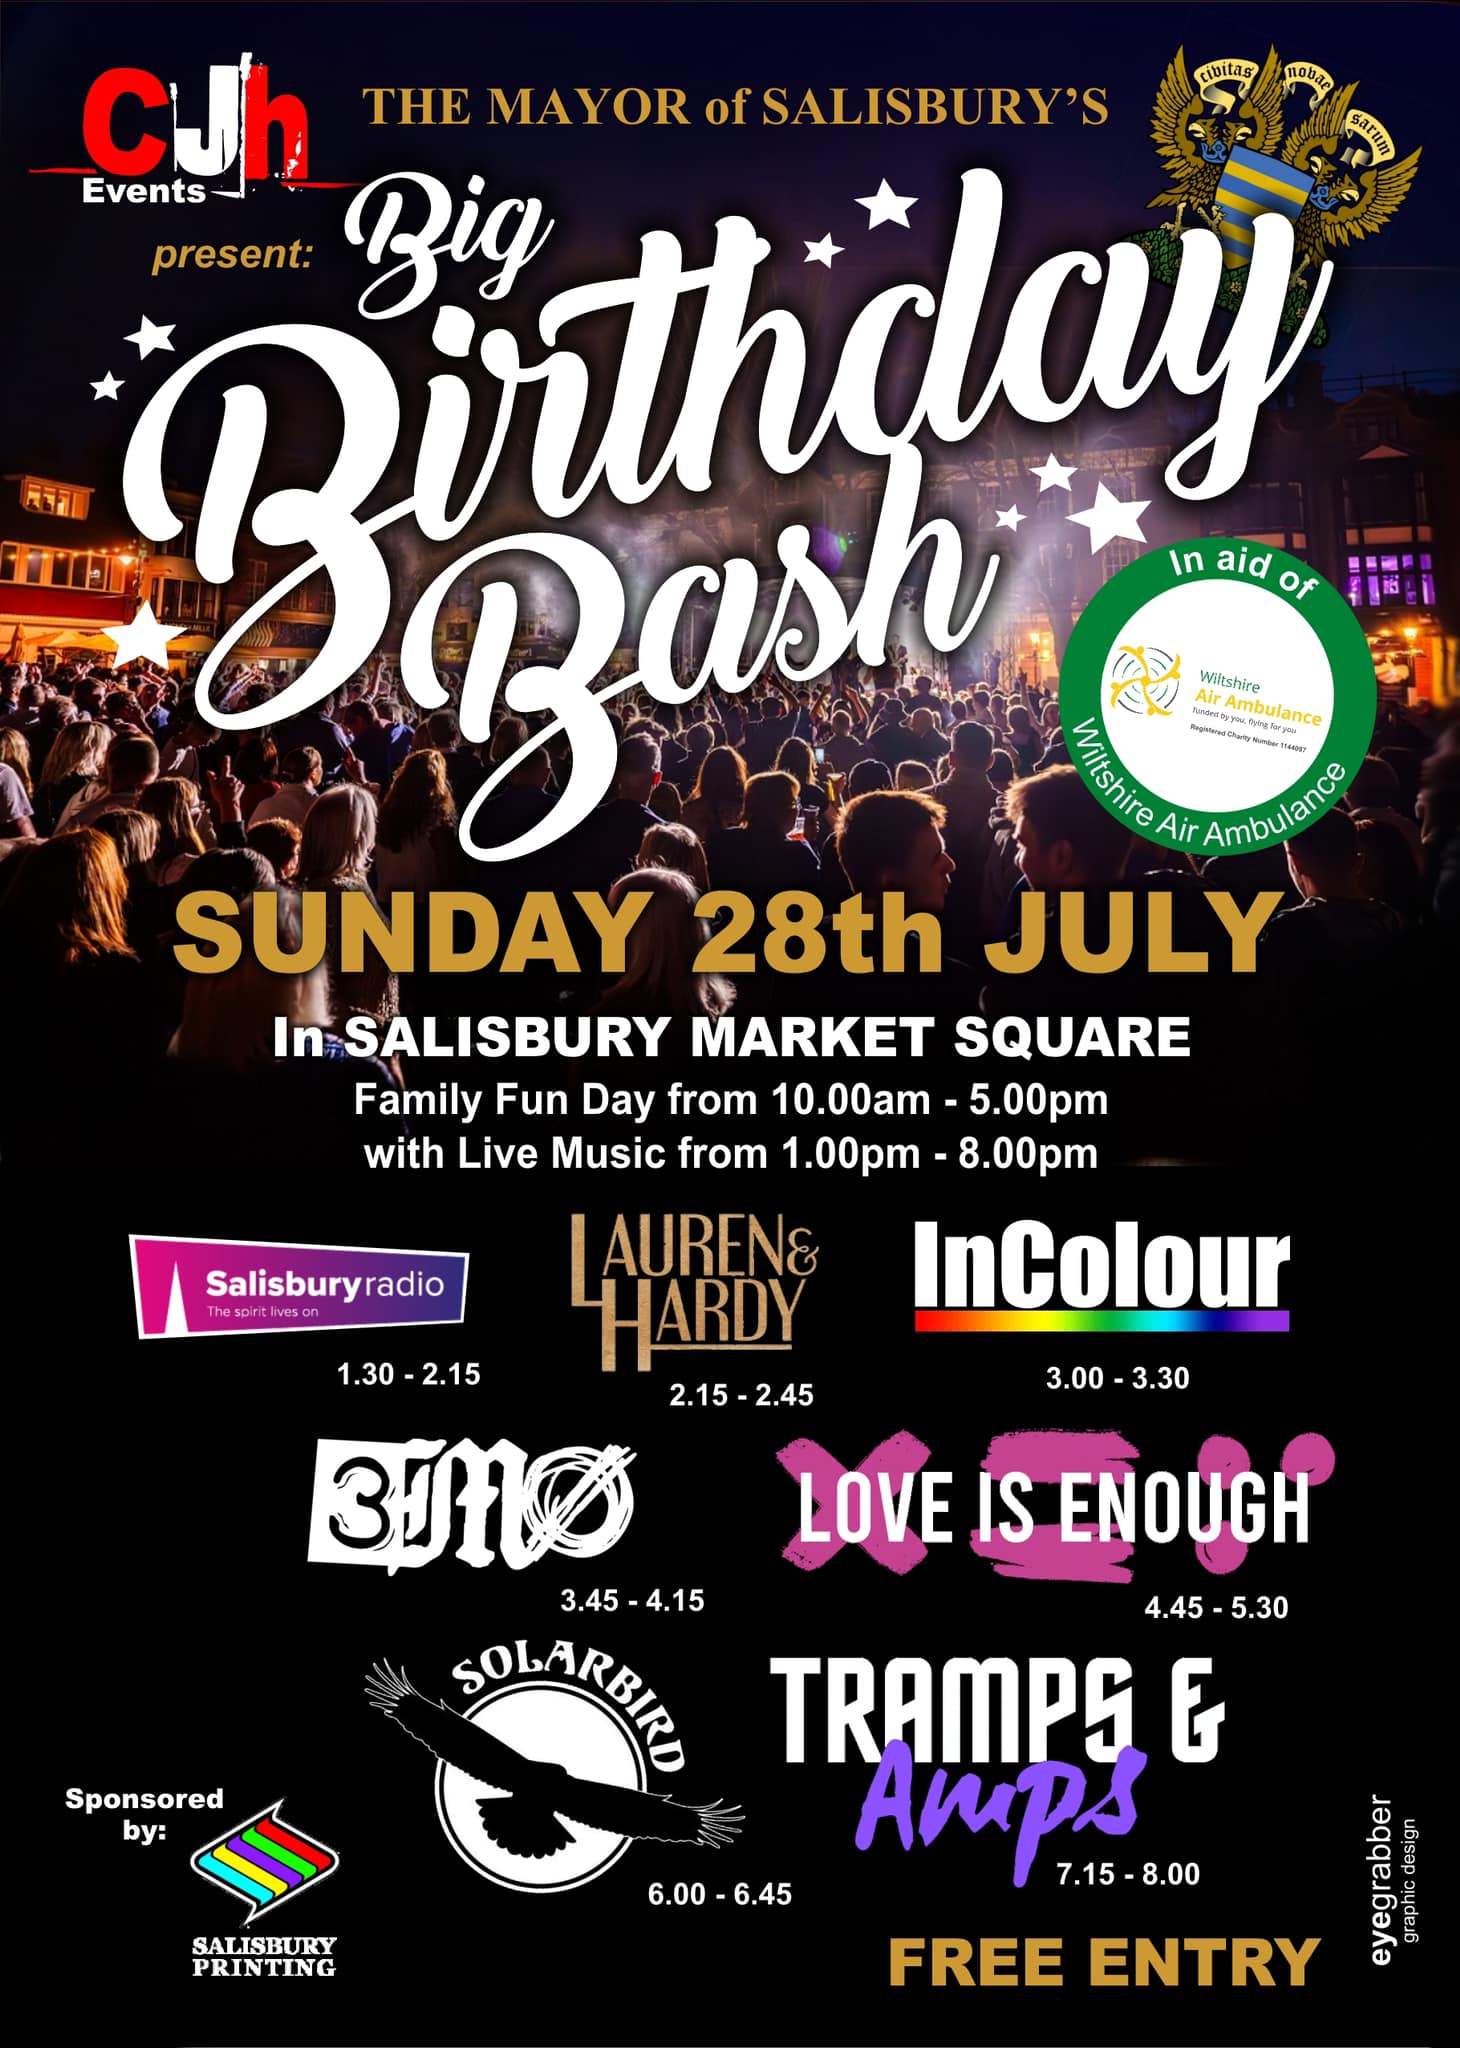 The Mayor of Salisbury's Big Birthday Bash: Lauren & Hardy + InColour + 3MO + Love Is Enough + Solarbird + Tramps & Amps